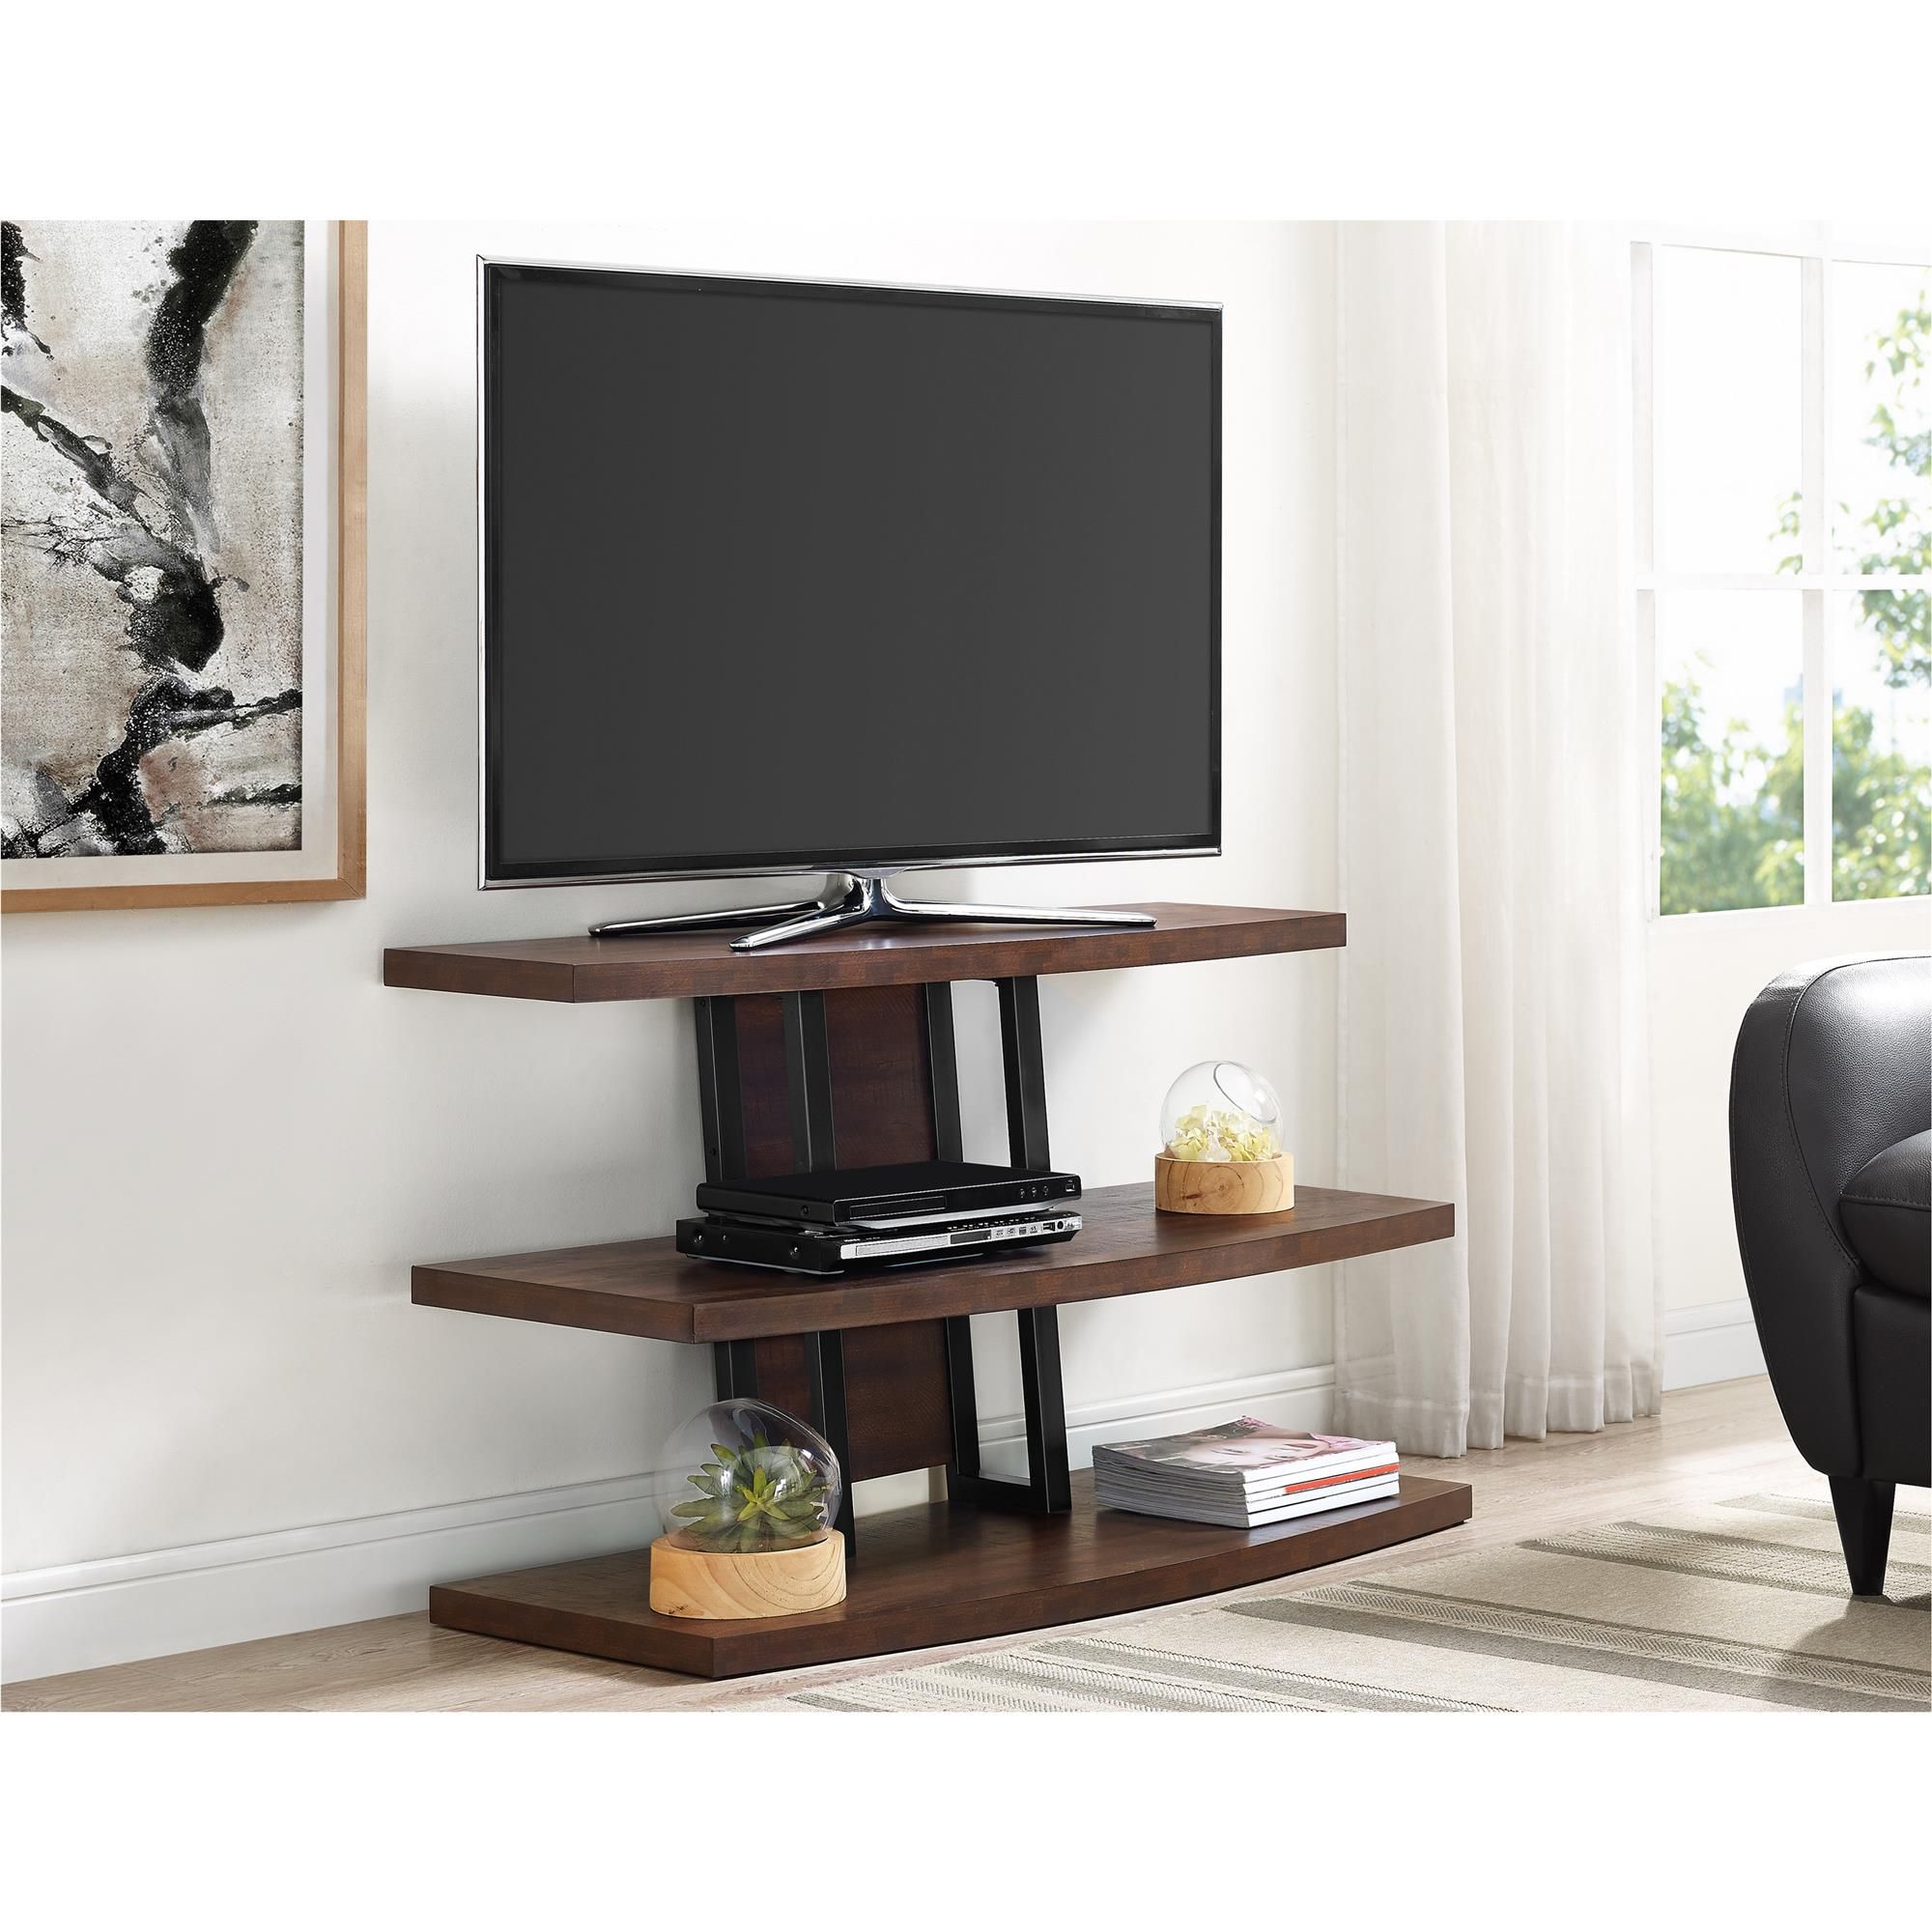 Ameriwood Home Castling Tv Stand For Tvs Up To 55 In Expresso Tv Stands (View 9 of 15)